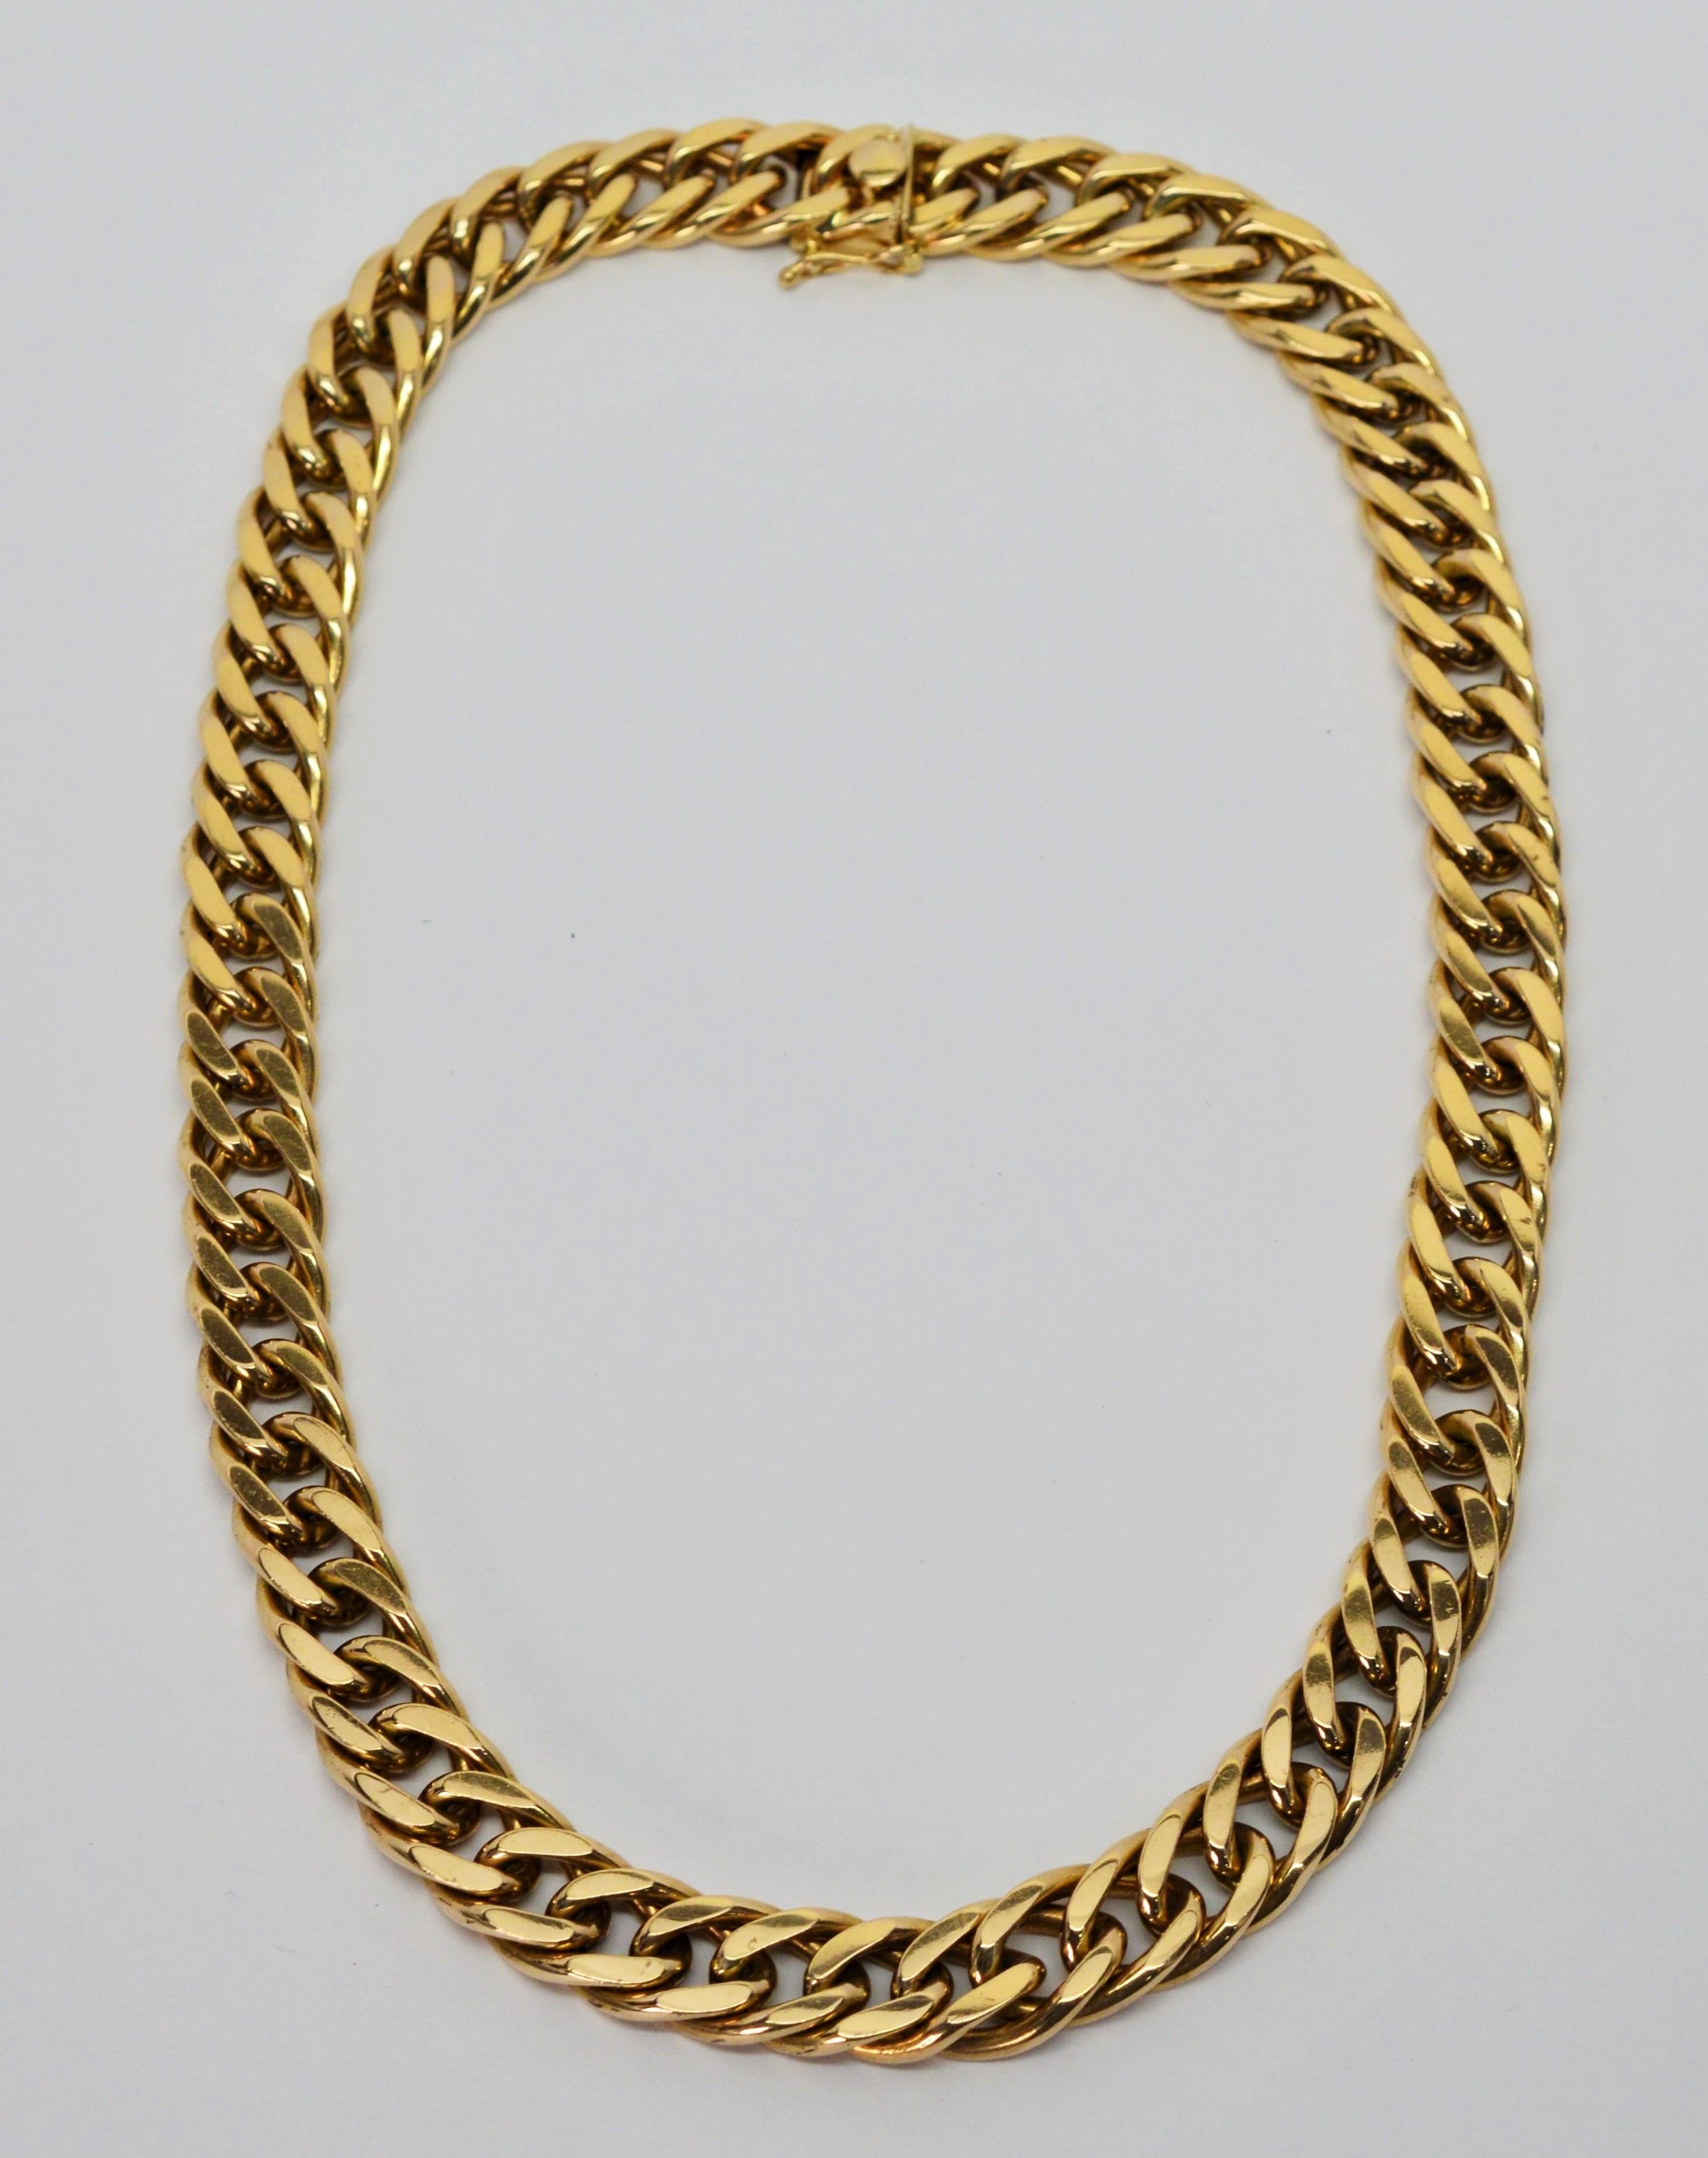 By Tiffany & Co., this diamond cut fourteen carat 14k yellow gold curb chain necklace has substantial heft. The quality is palpable in this sixteen inch (16